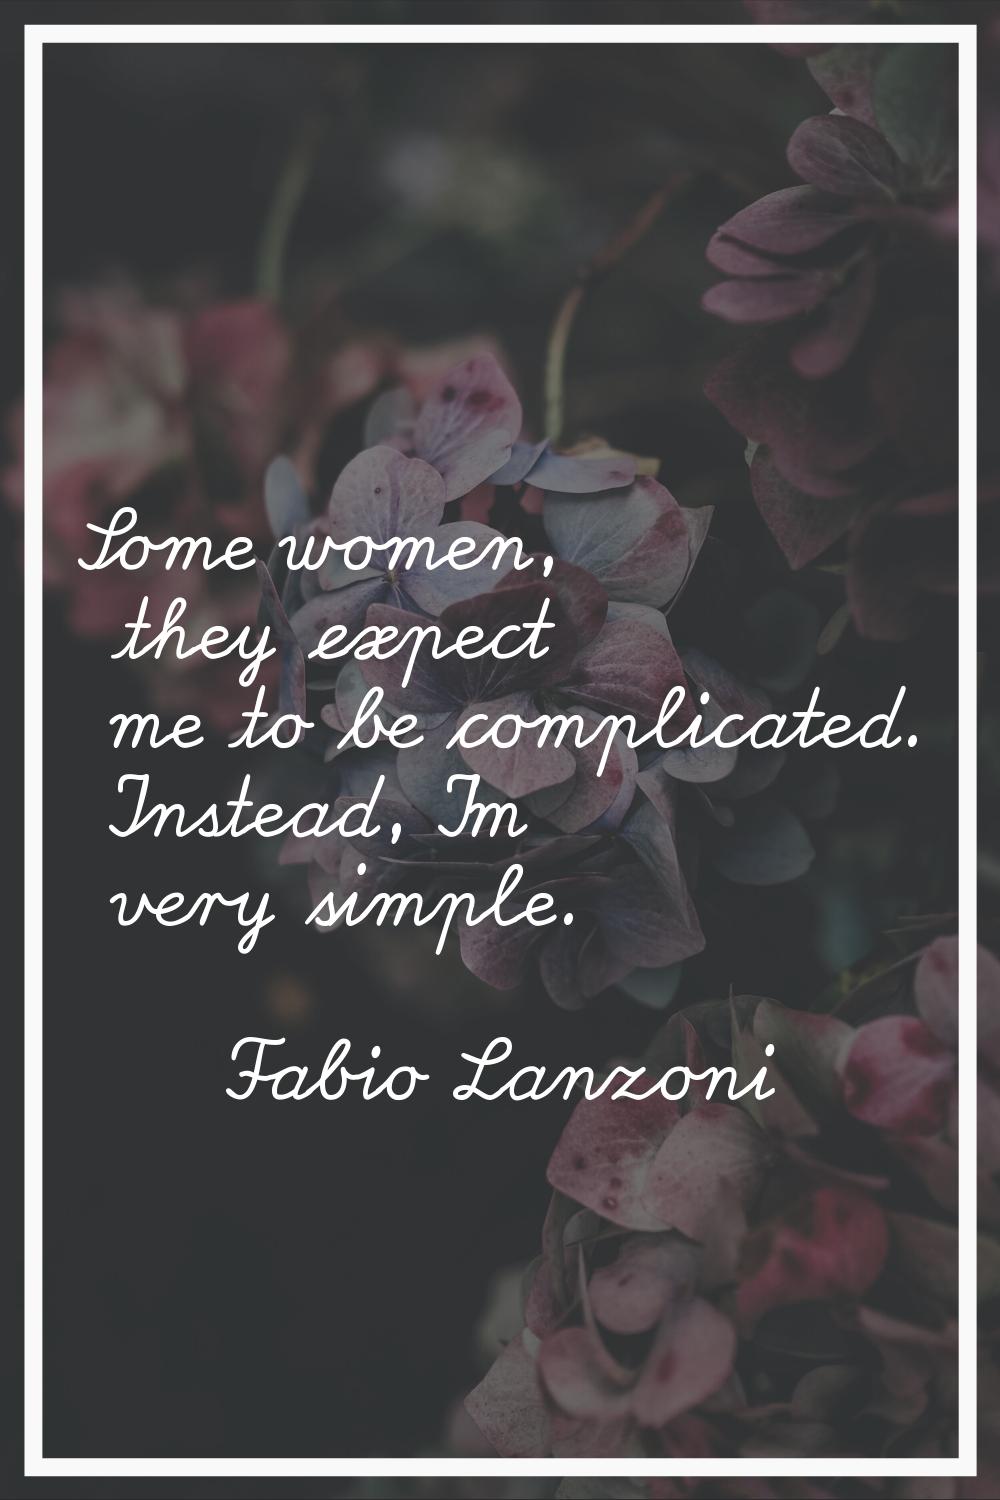 Some women, they expect me to be complicated. Instead, I'm very simple.